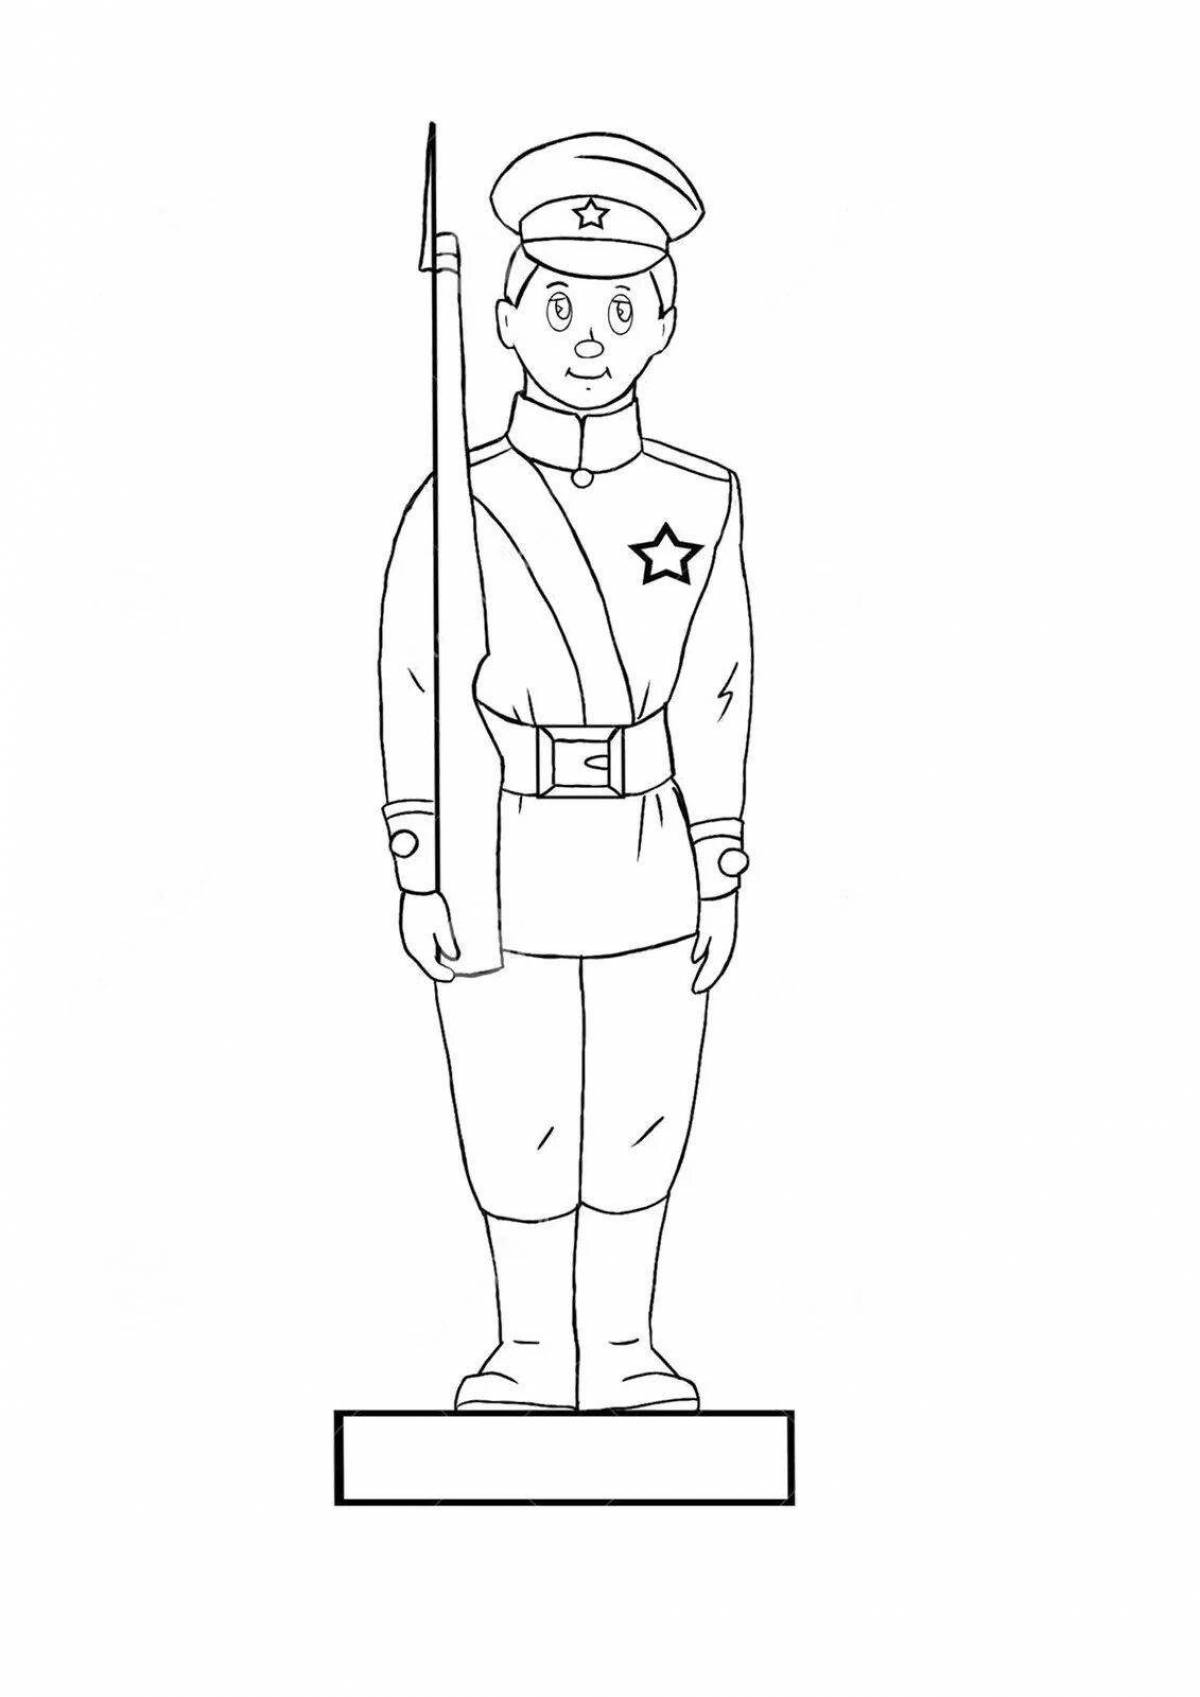 Great soldier on post drawing